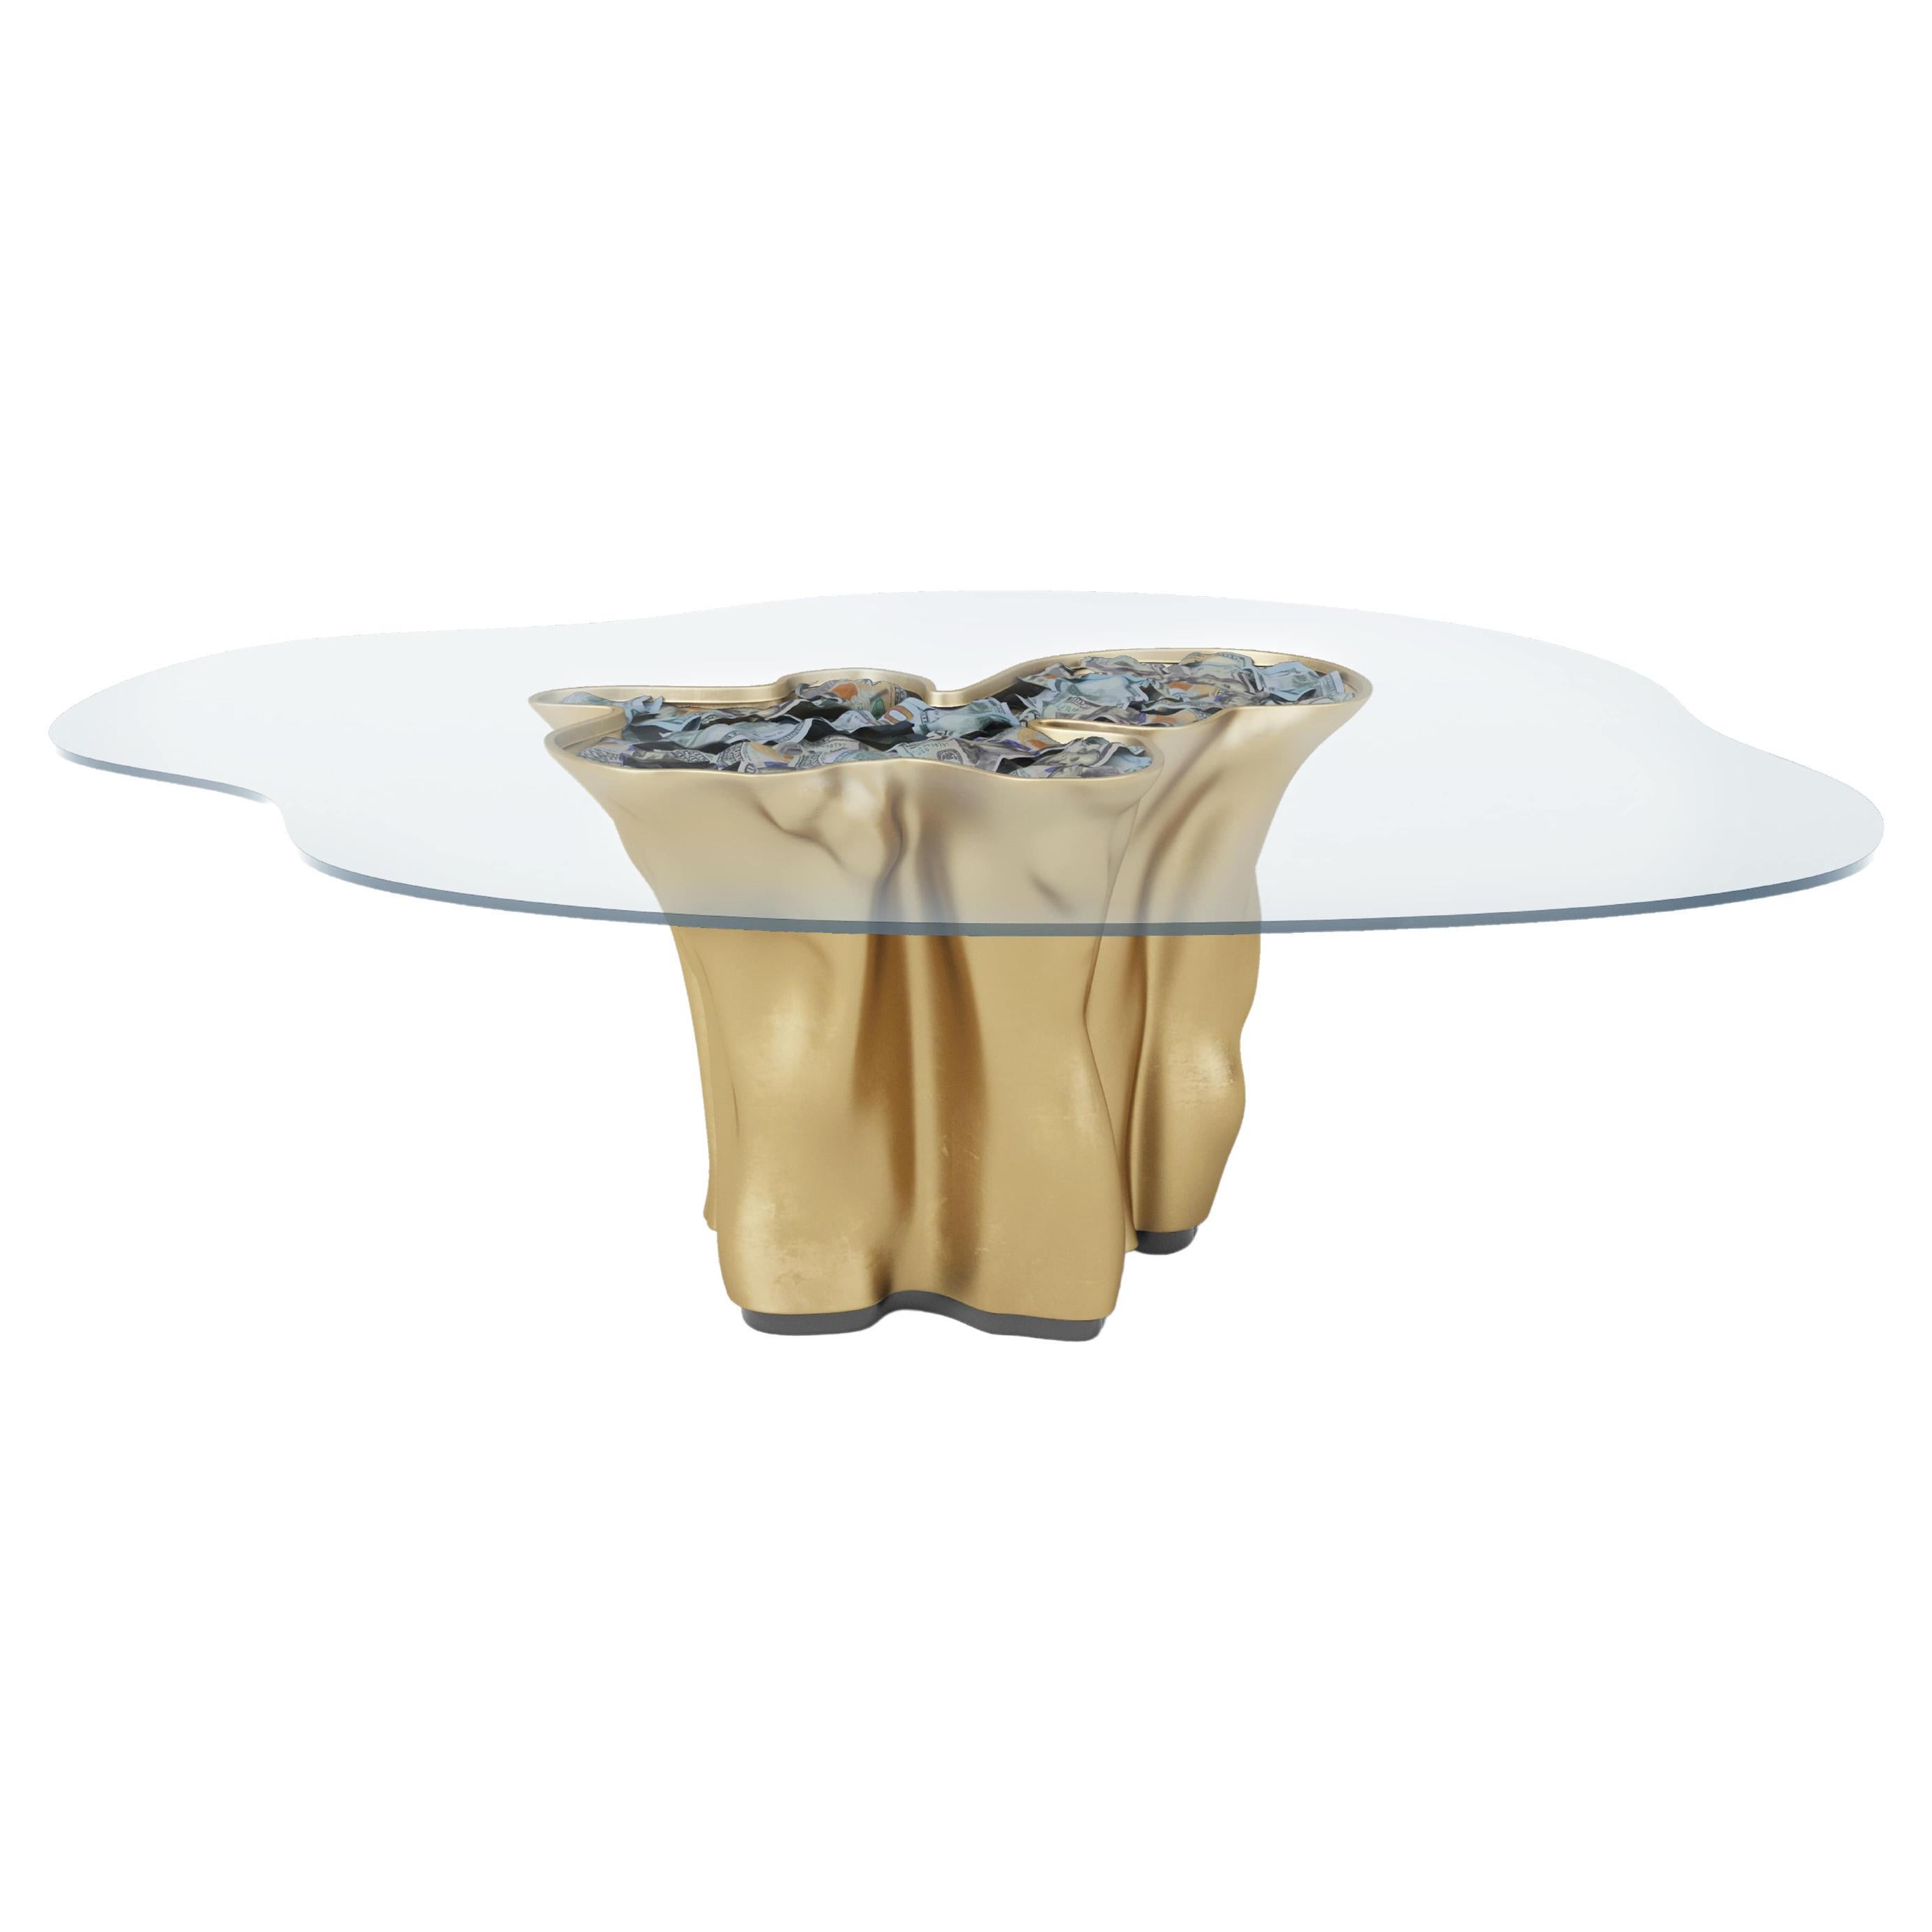 Money Dining Table by Fabio Arcaini and Paul Rousso